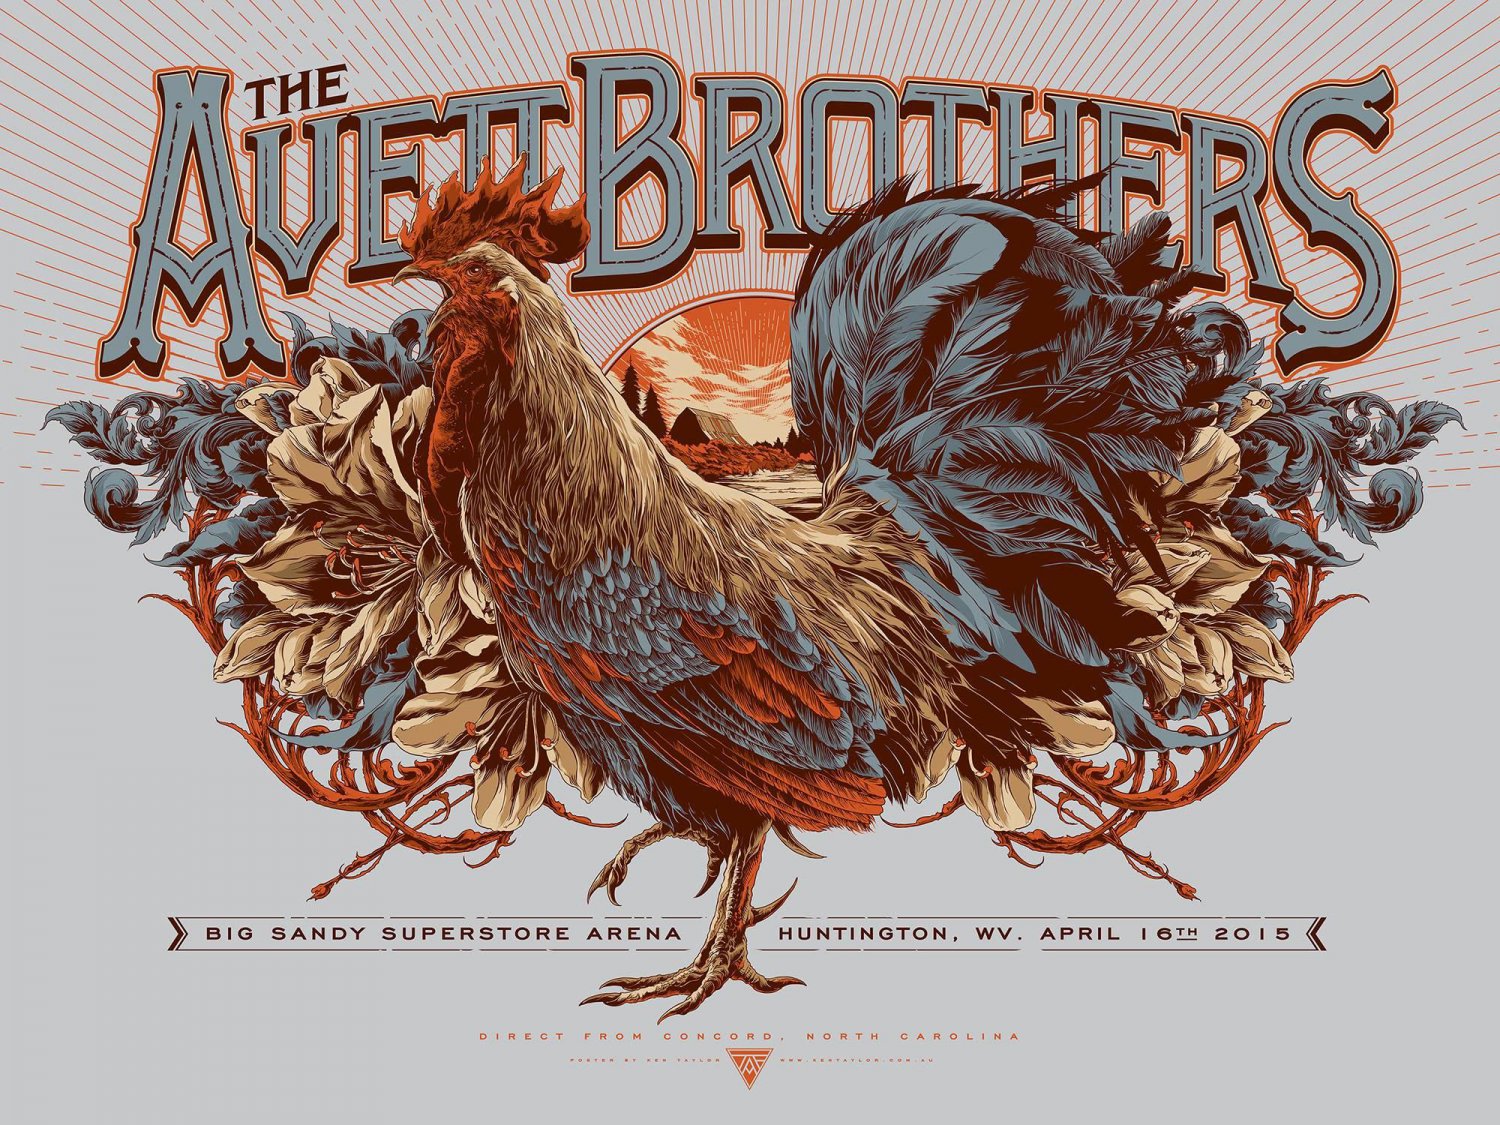 The Avett Brothers Concert 13x19 inches Poster Print